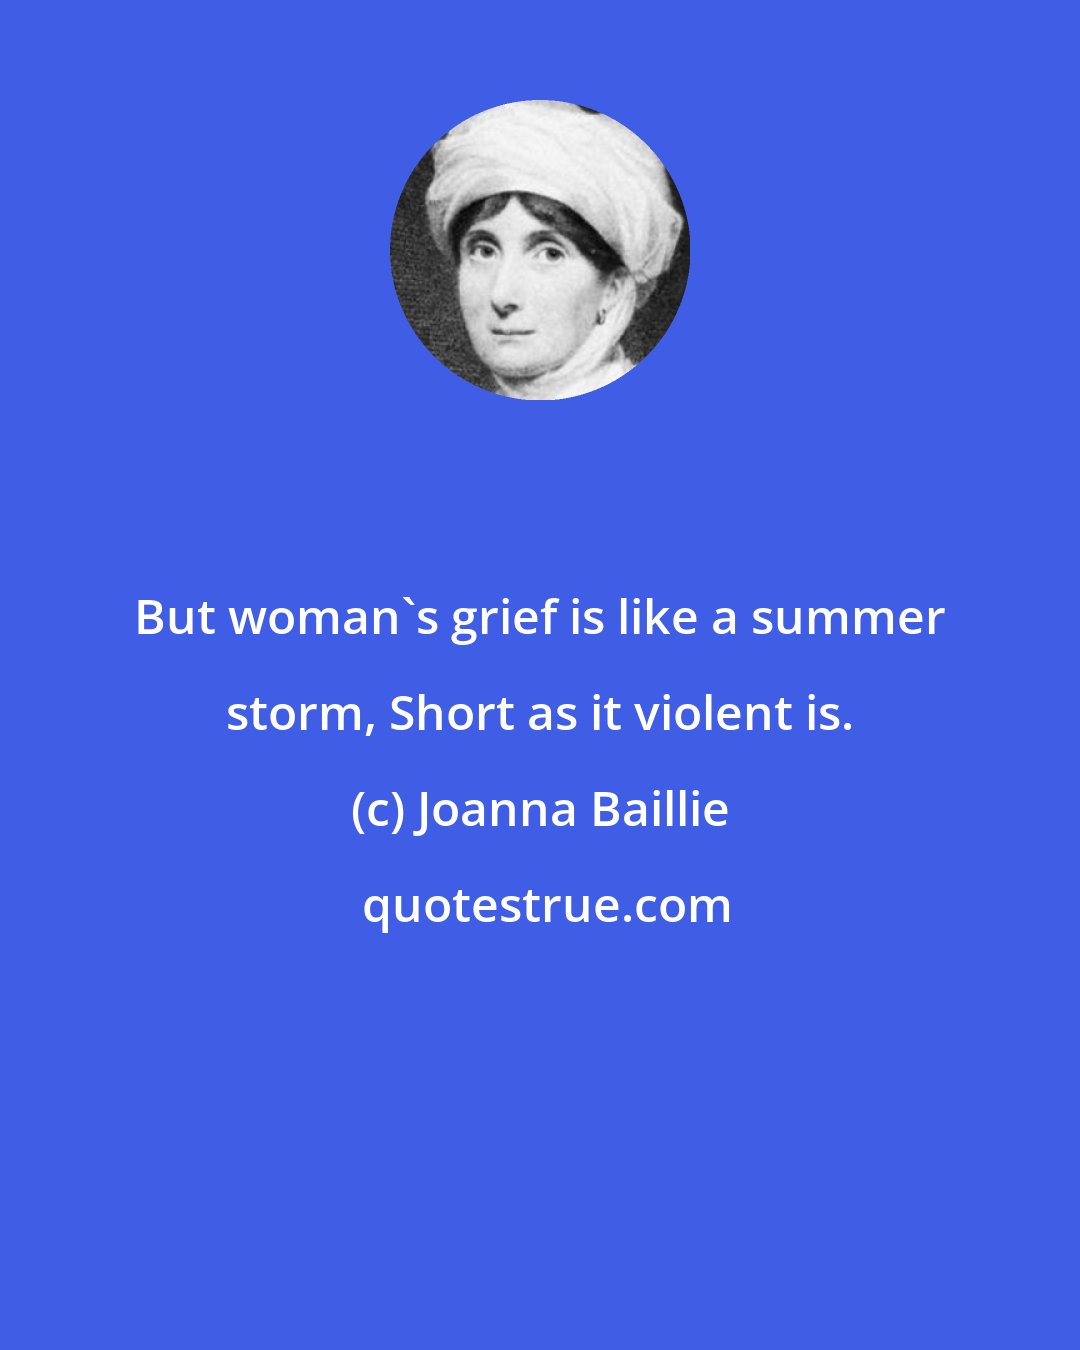 Joanna Baillie: But woman's grief is like a summer storm, Short as it violent is.